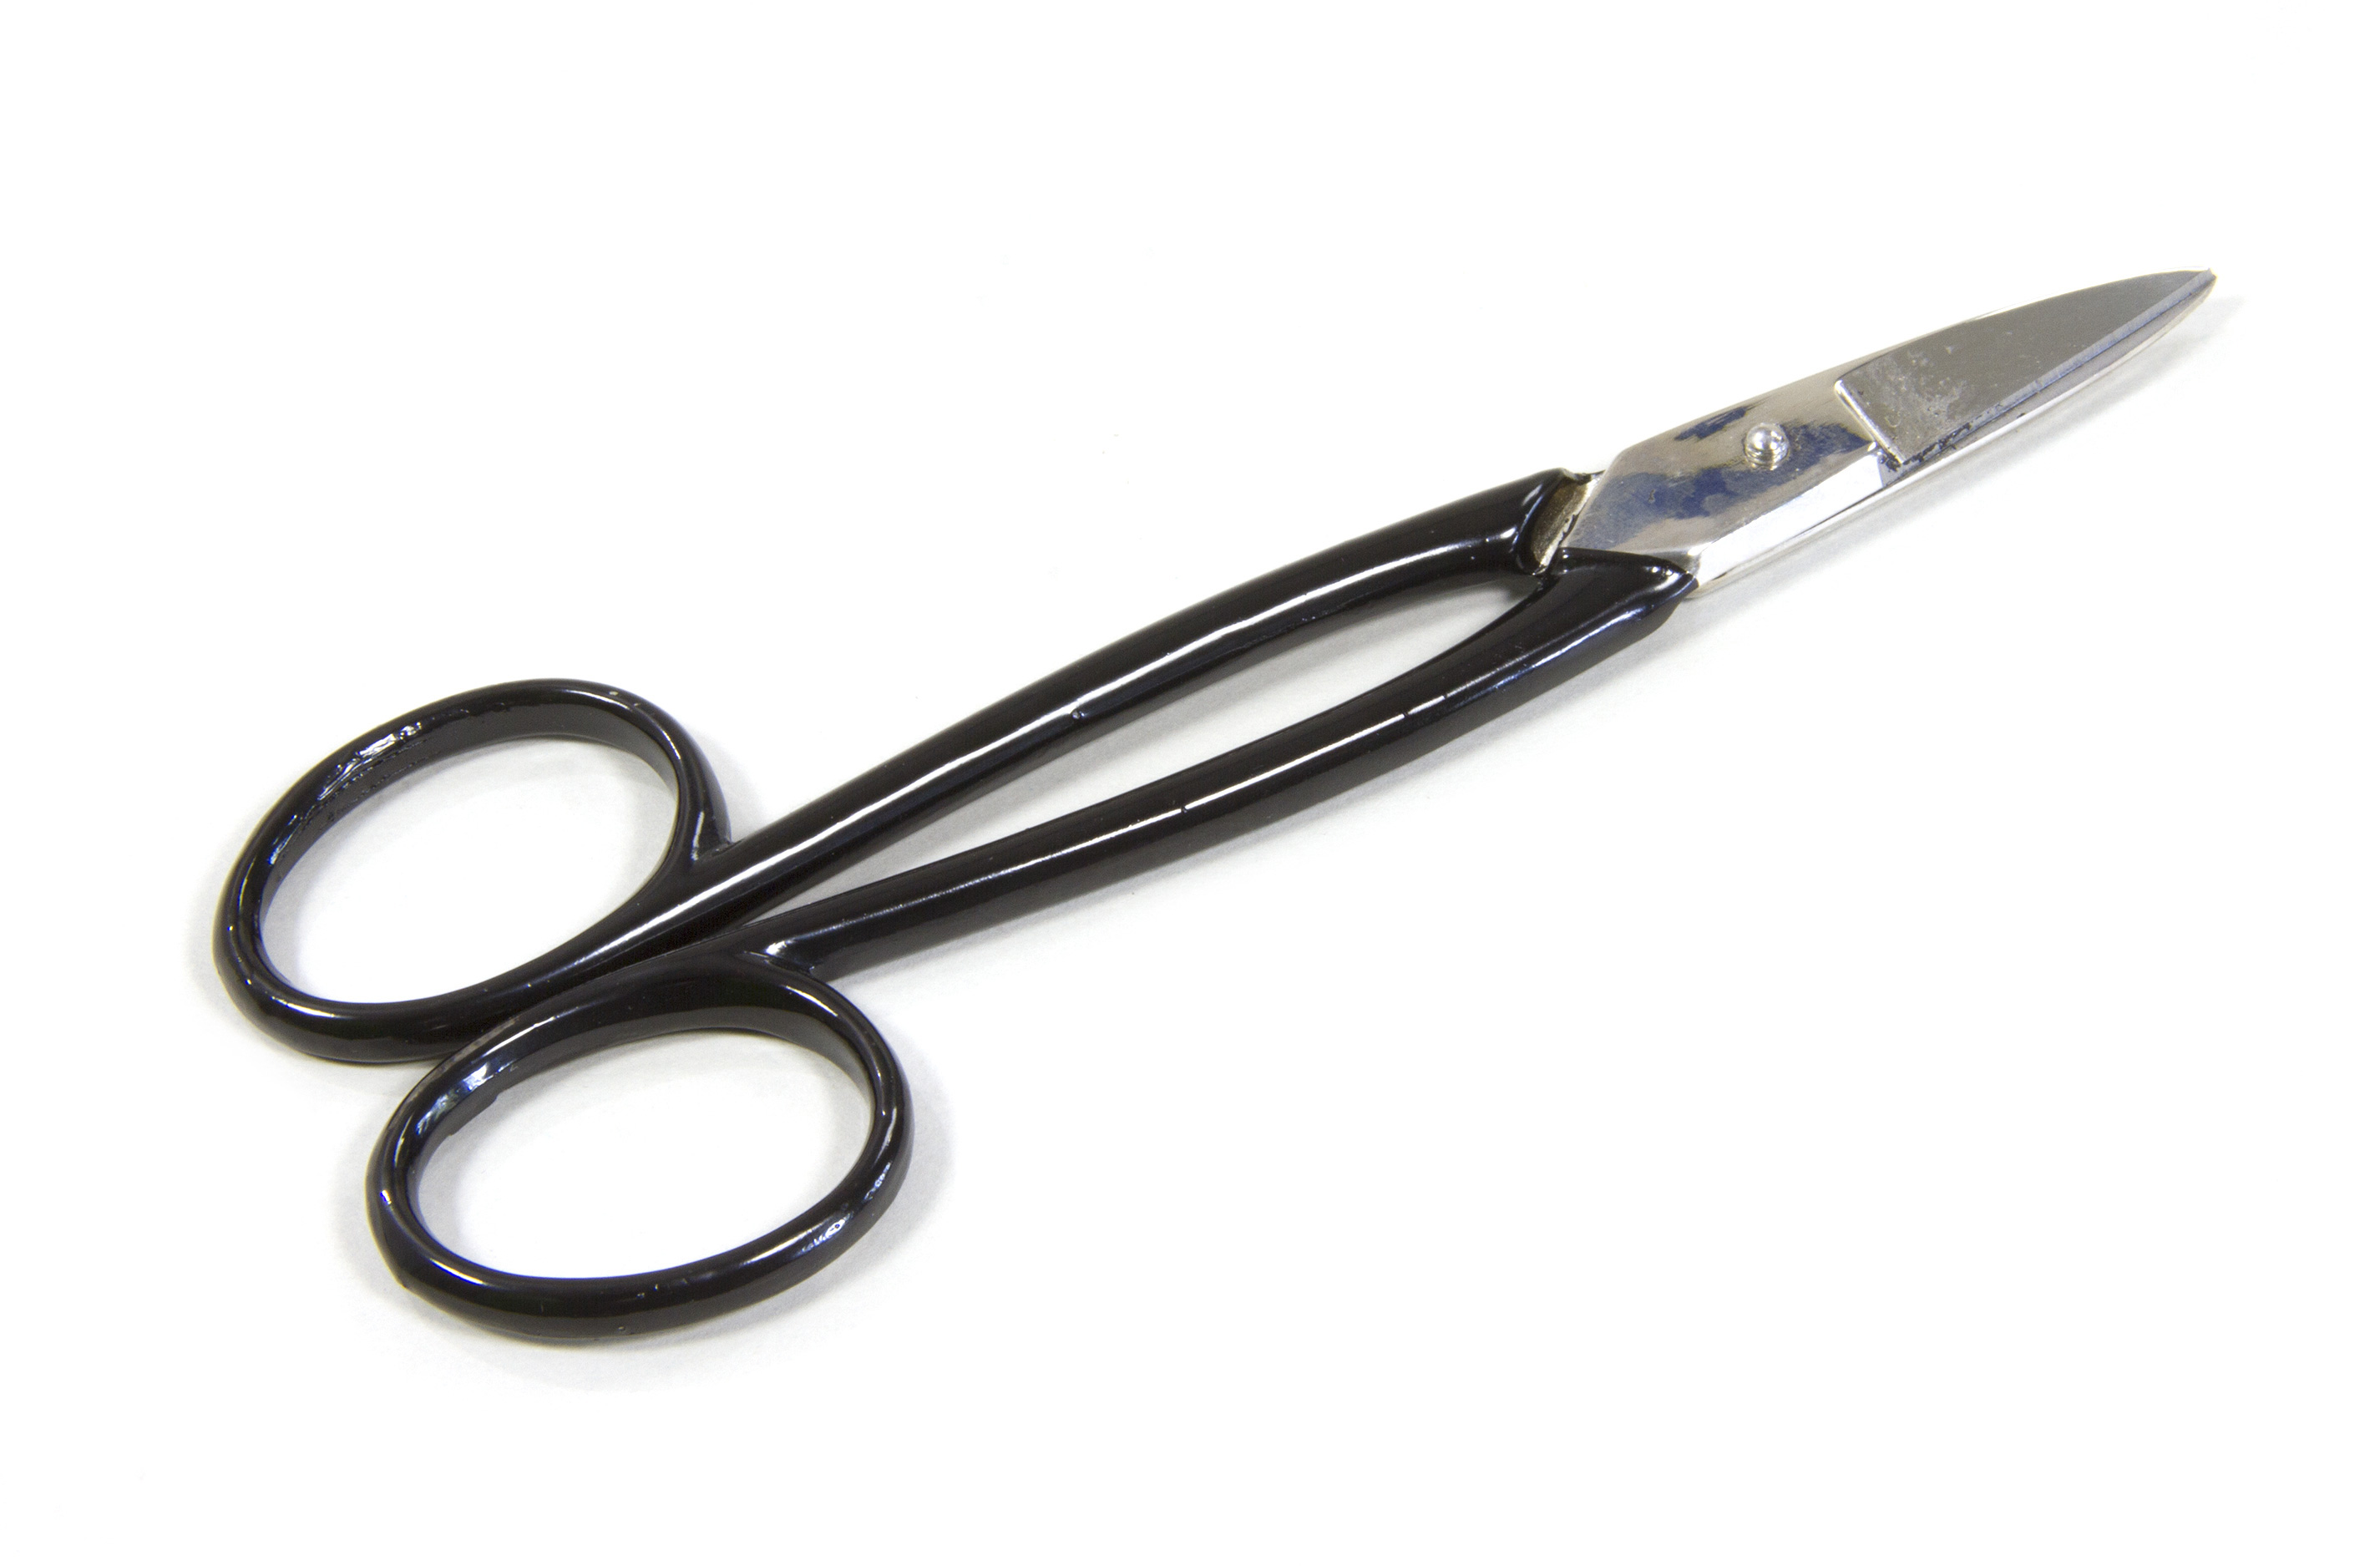 y6747 Model scissors with straight cutter